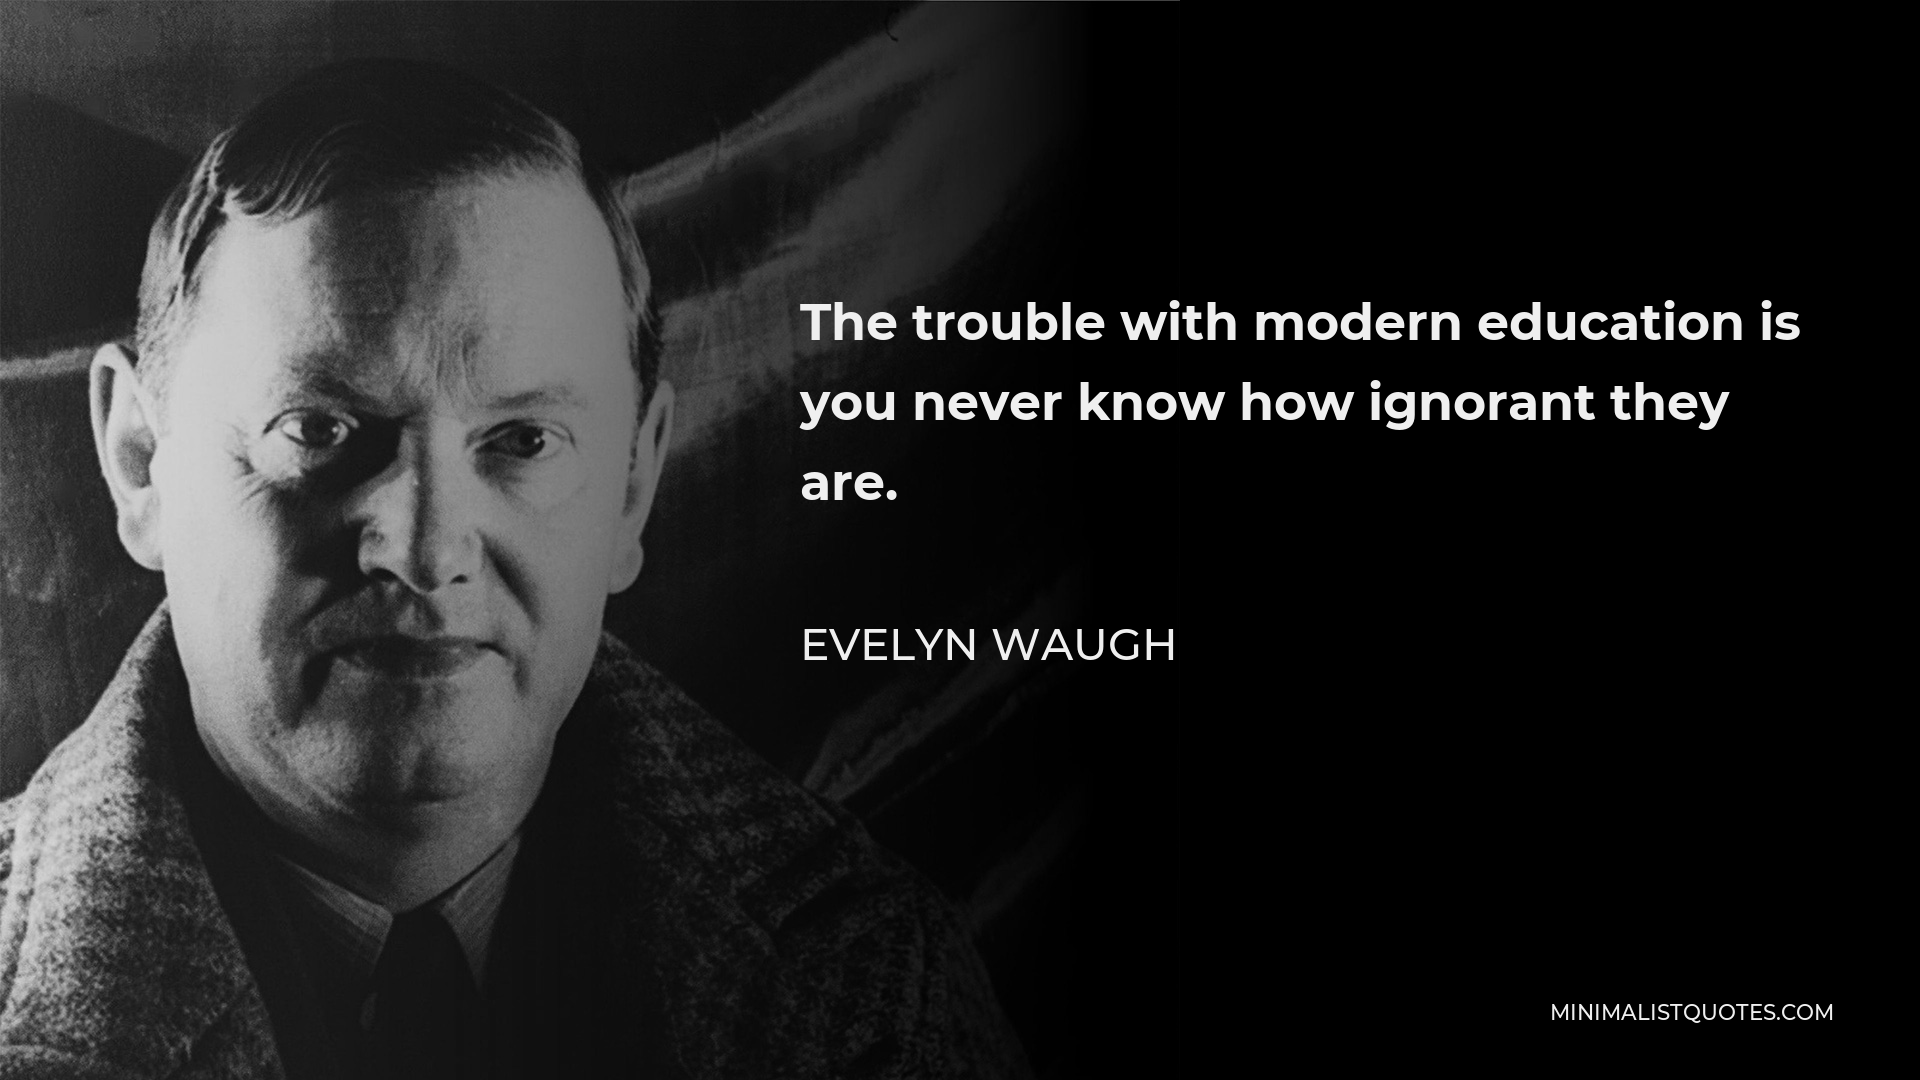 Evelyn Waugh Quote - The trouble with modern education is you never know how ignorant they are.